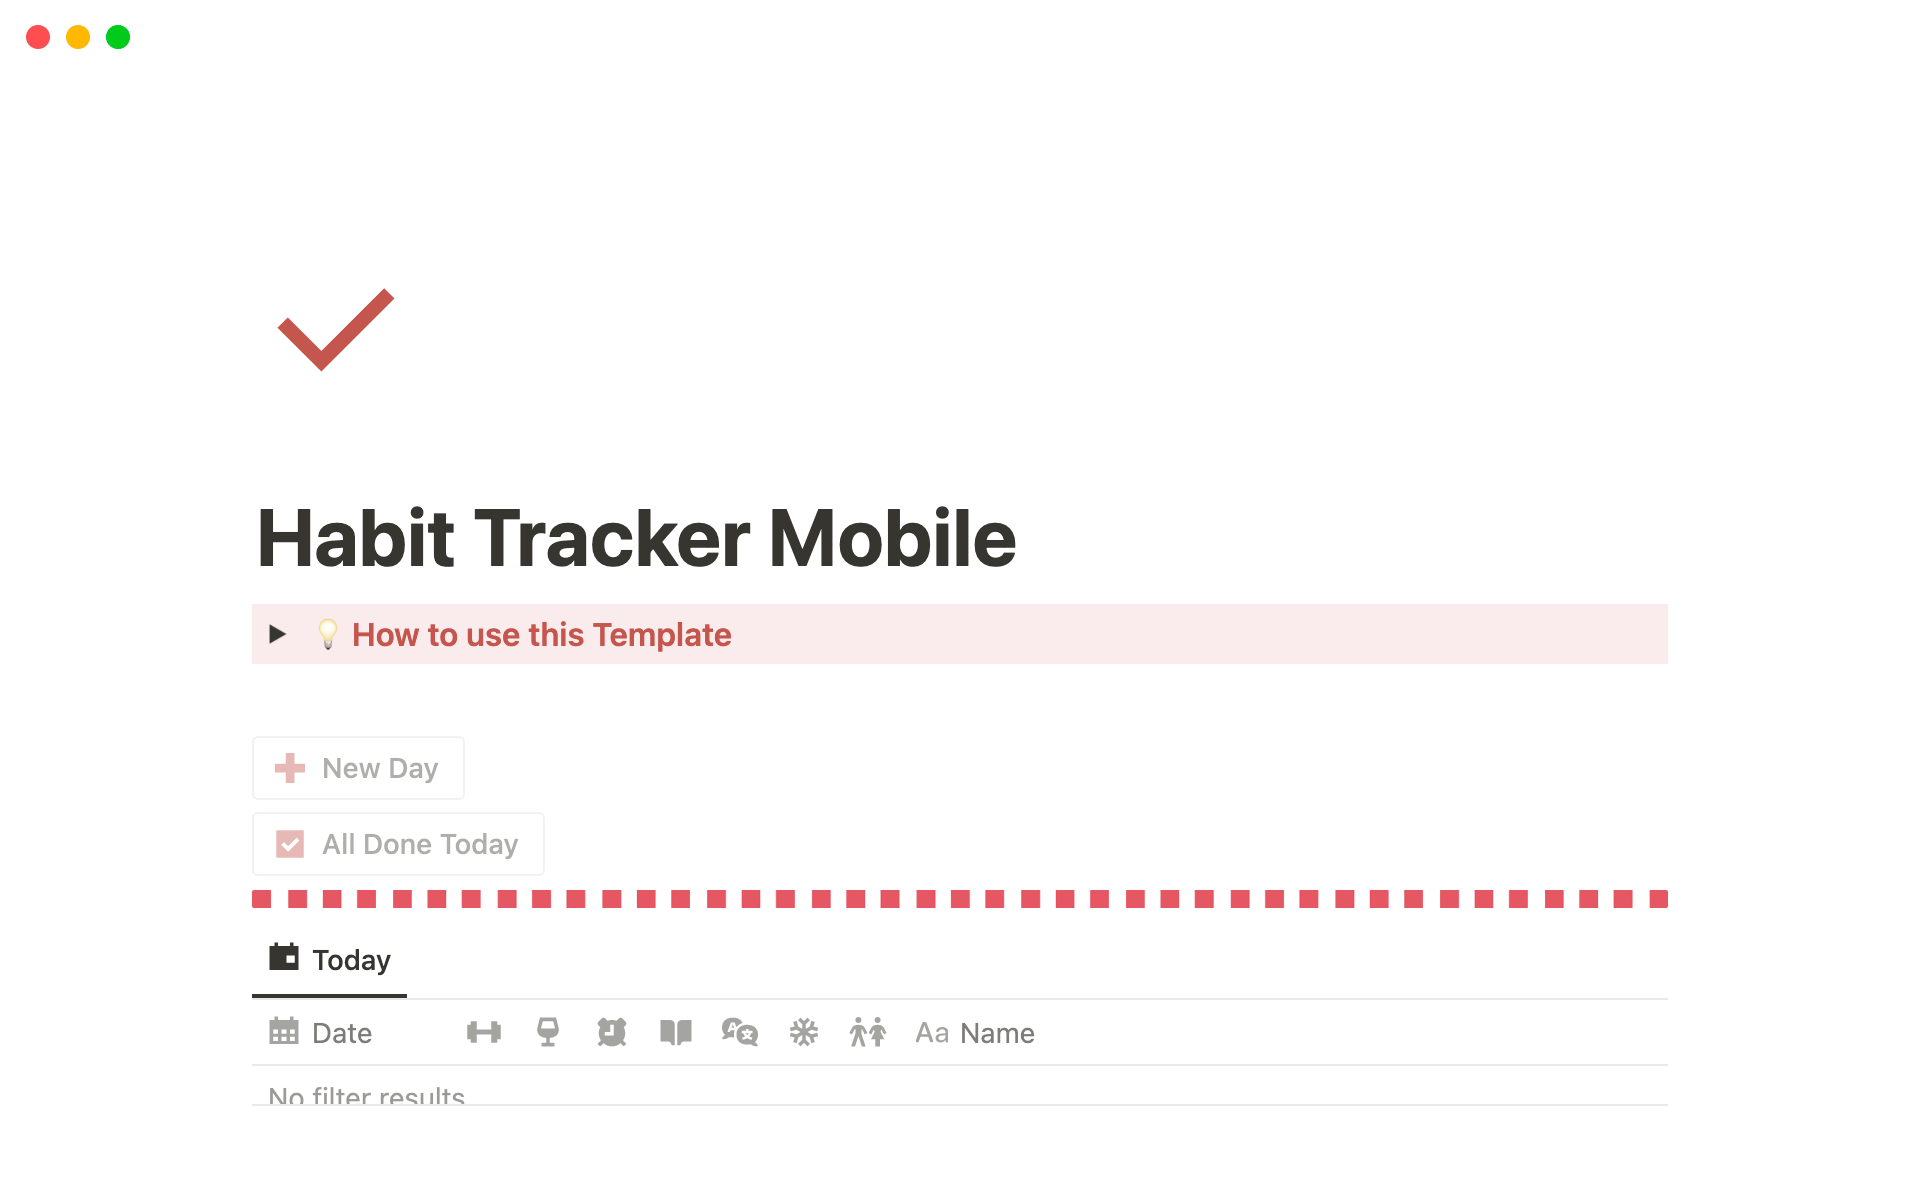 Easily track your habits on mobile devices wherever you are.